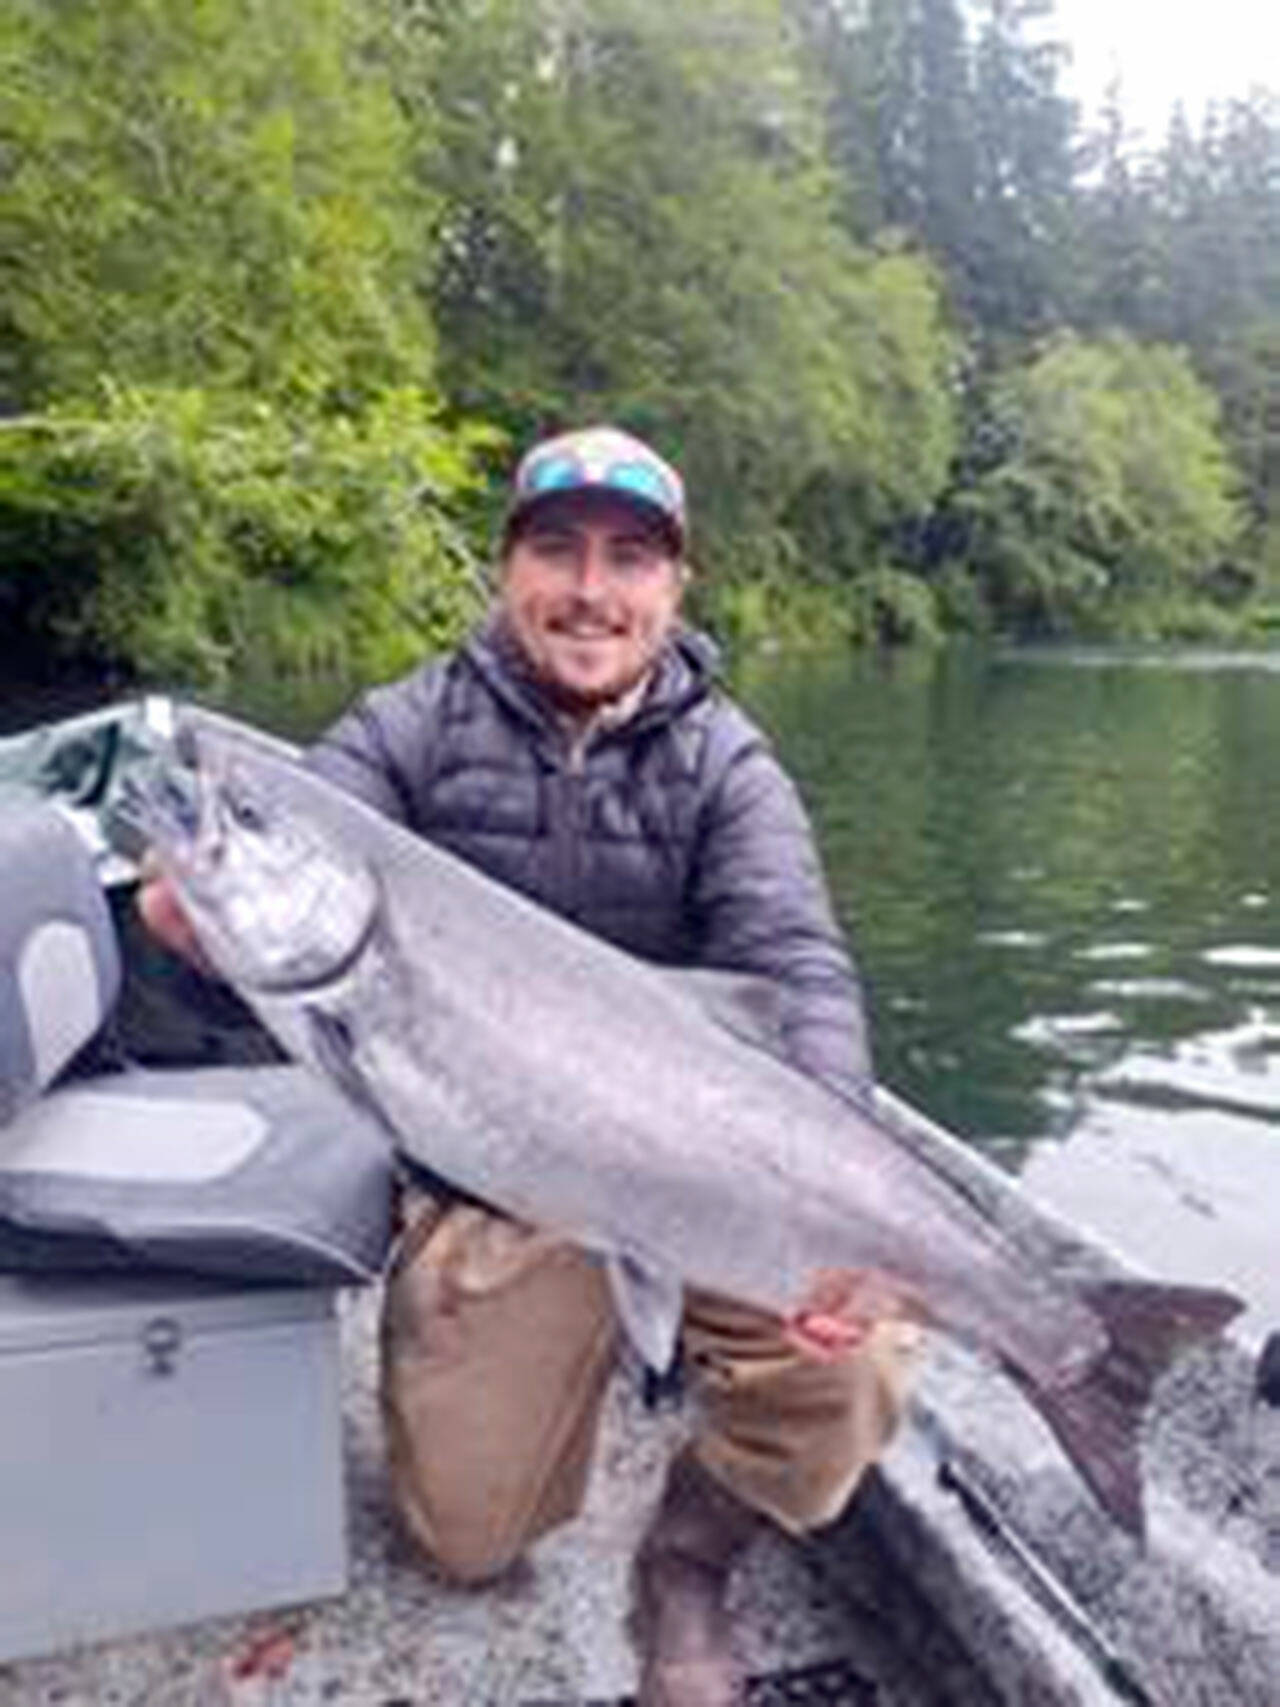 As one of the auction adventures, Jason Ray will take two guests on the Sol Duc and Quileute rivers to fish for coho salmon. He will provide gear and tackle.